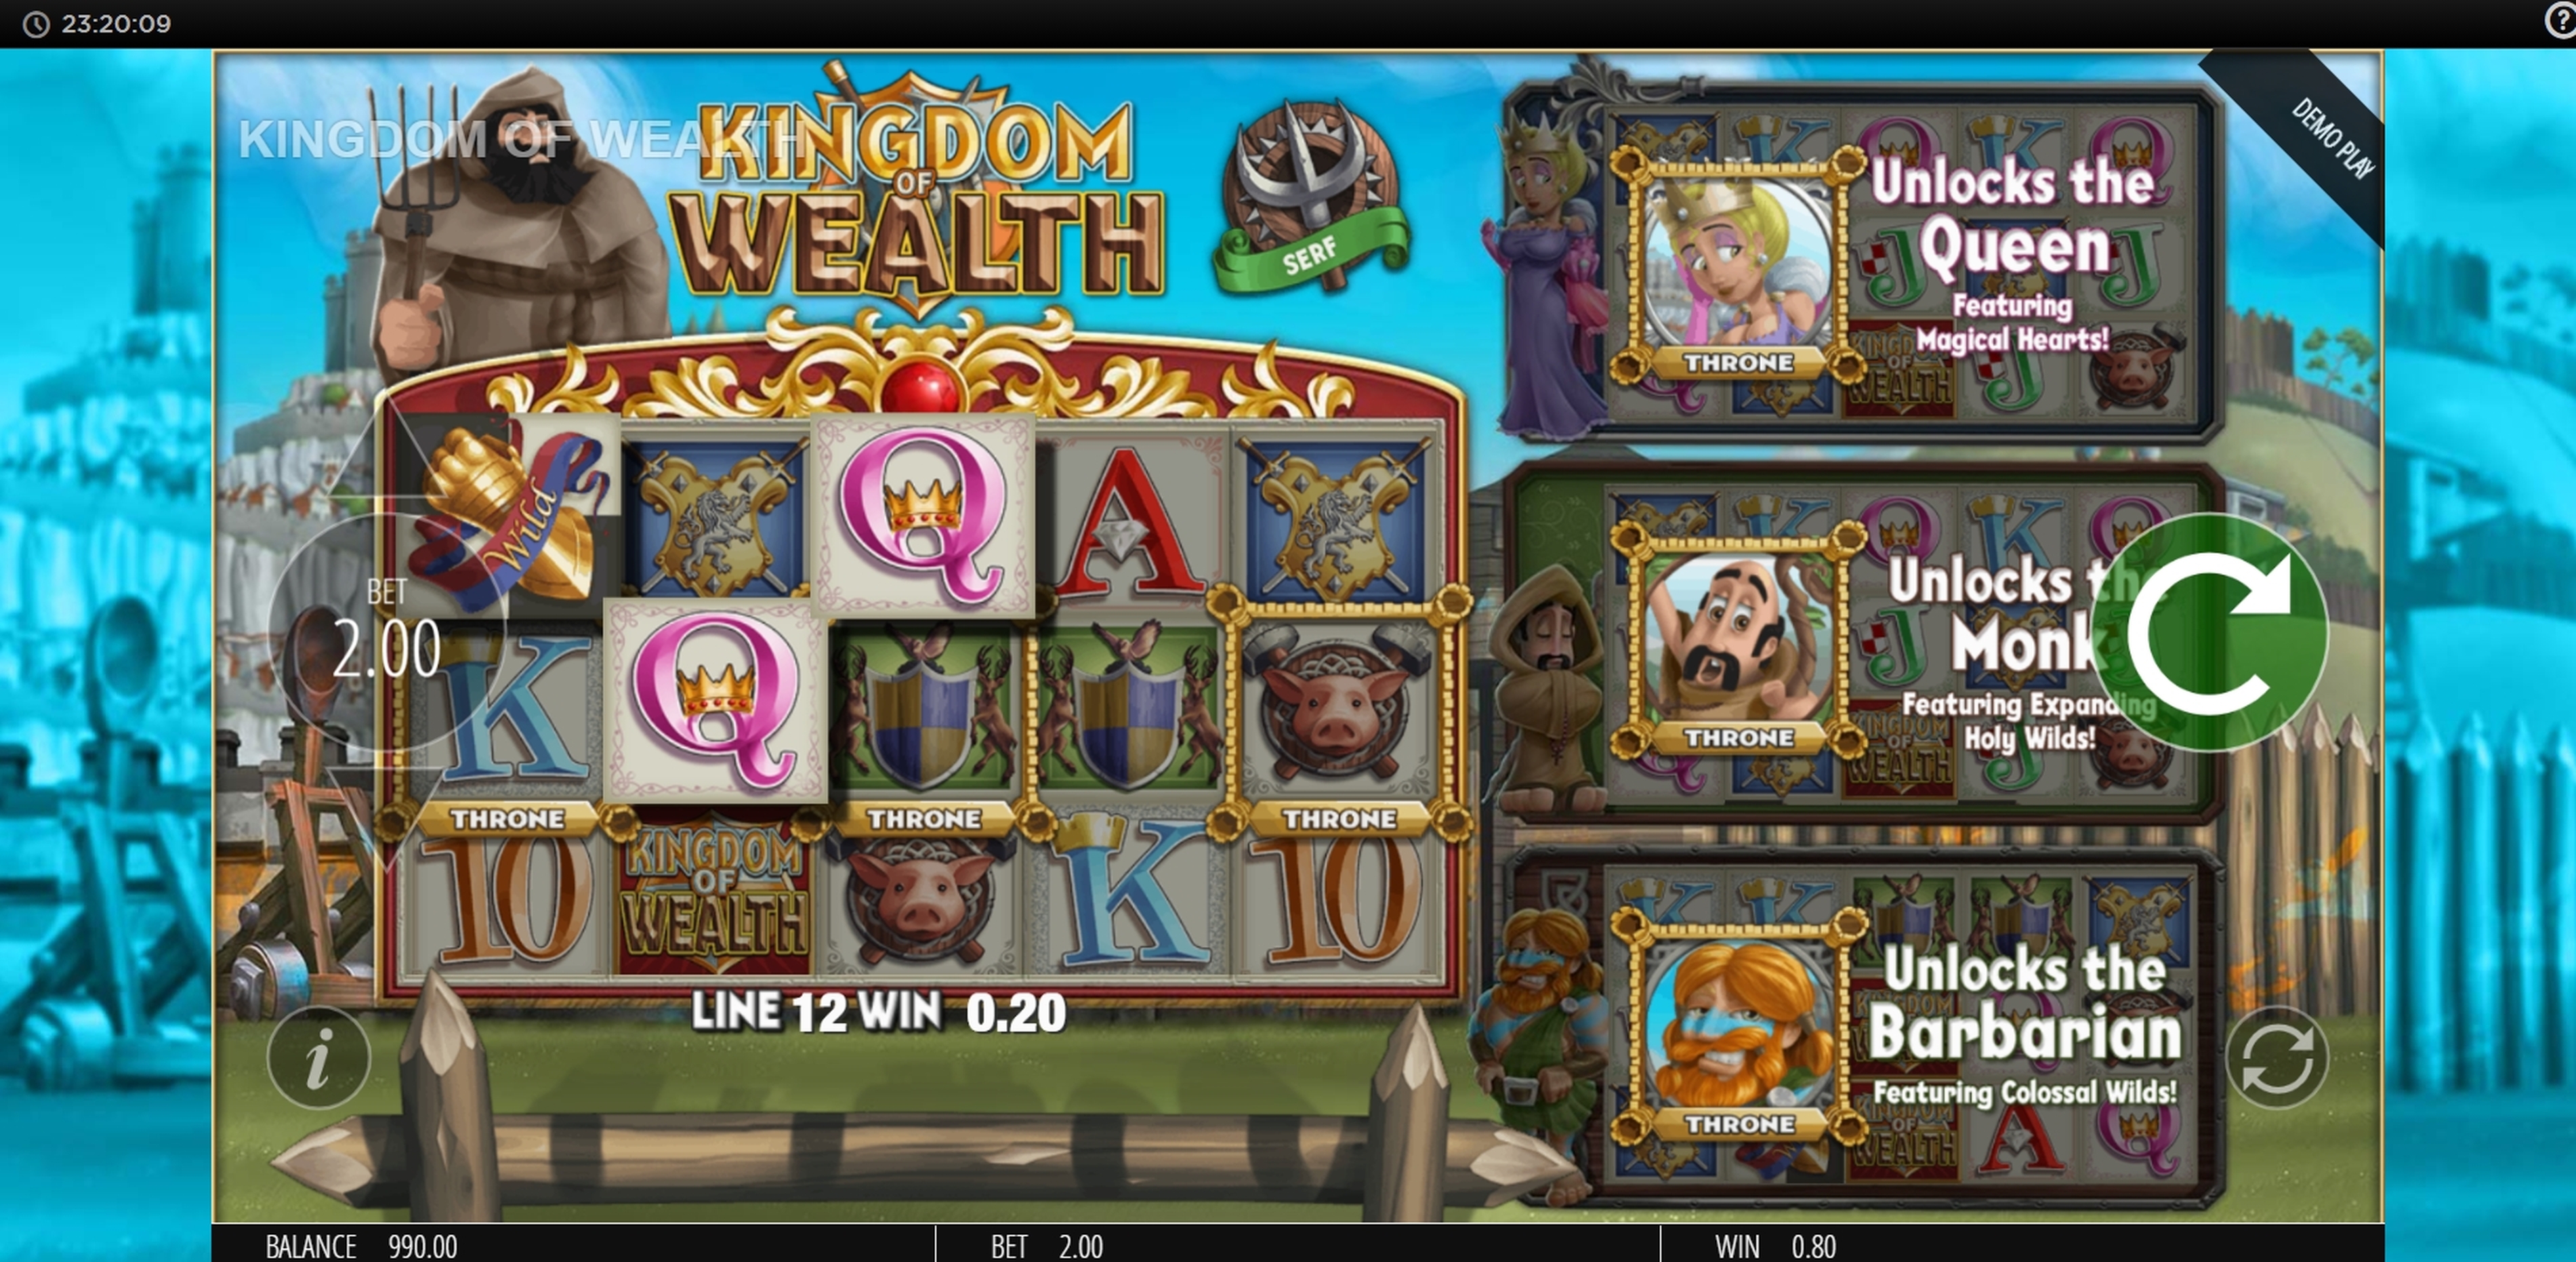 Win Money in Kingdom of Wealth Free Slot Game by Blueprint Gaming